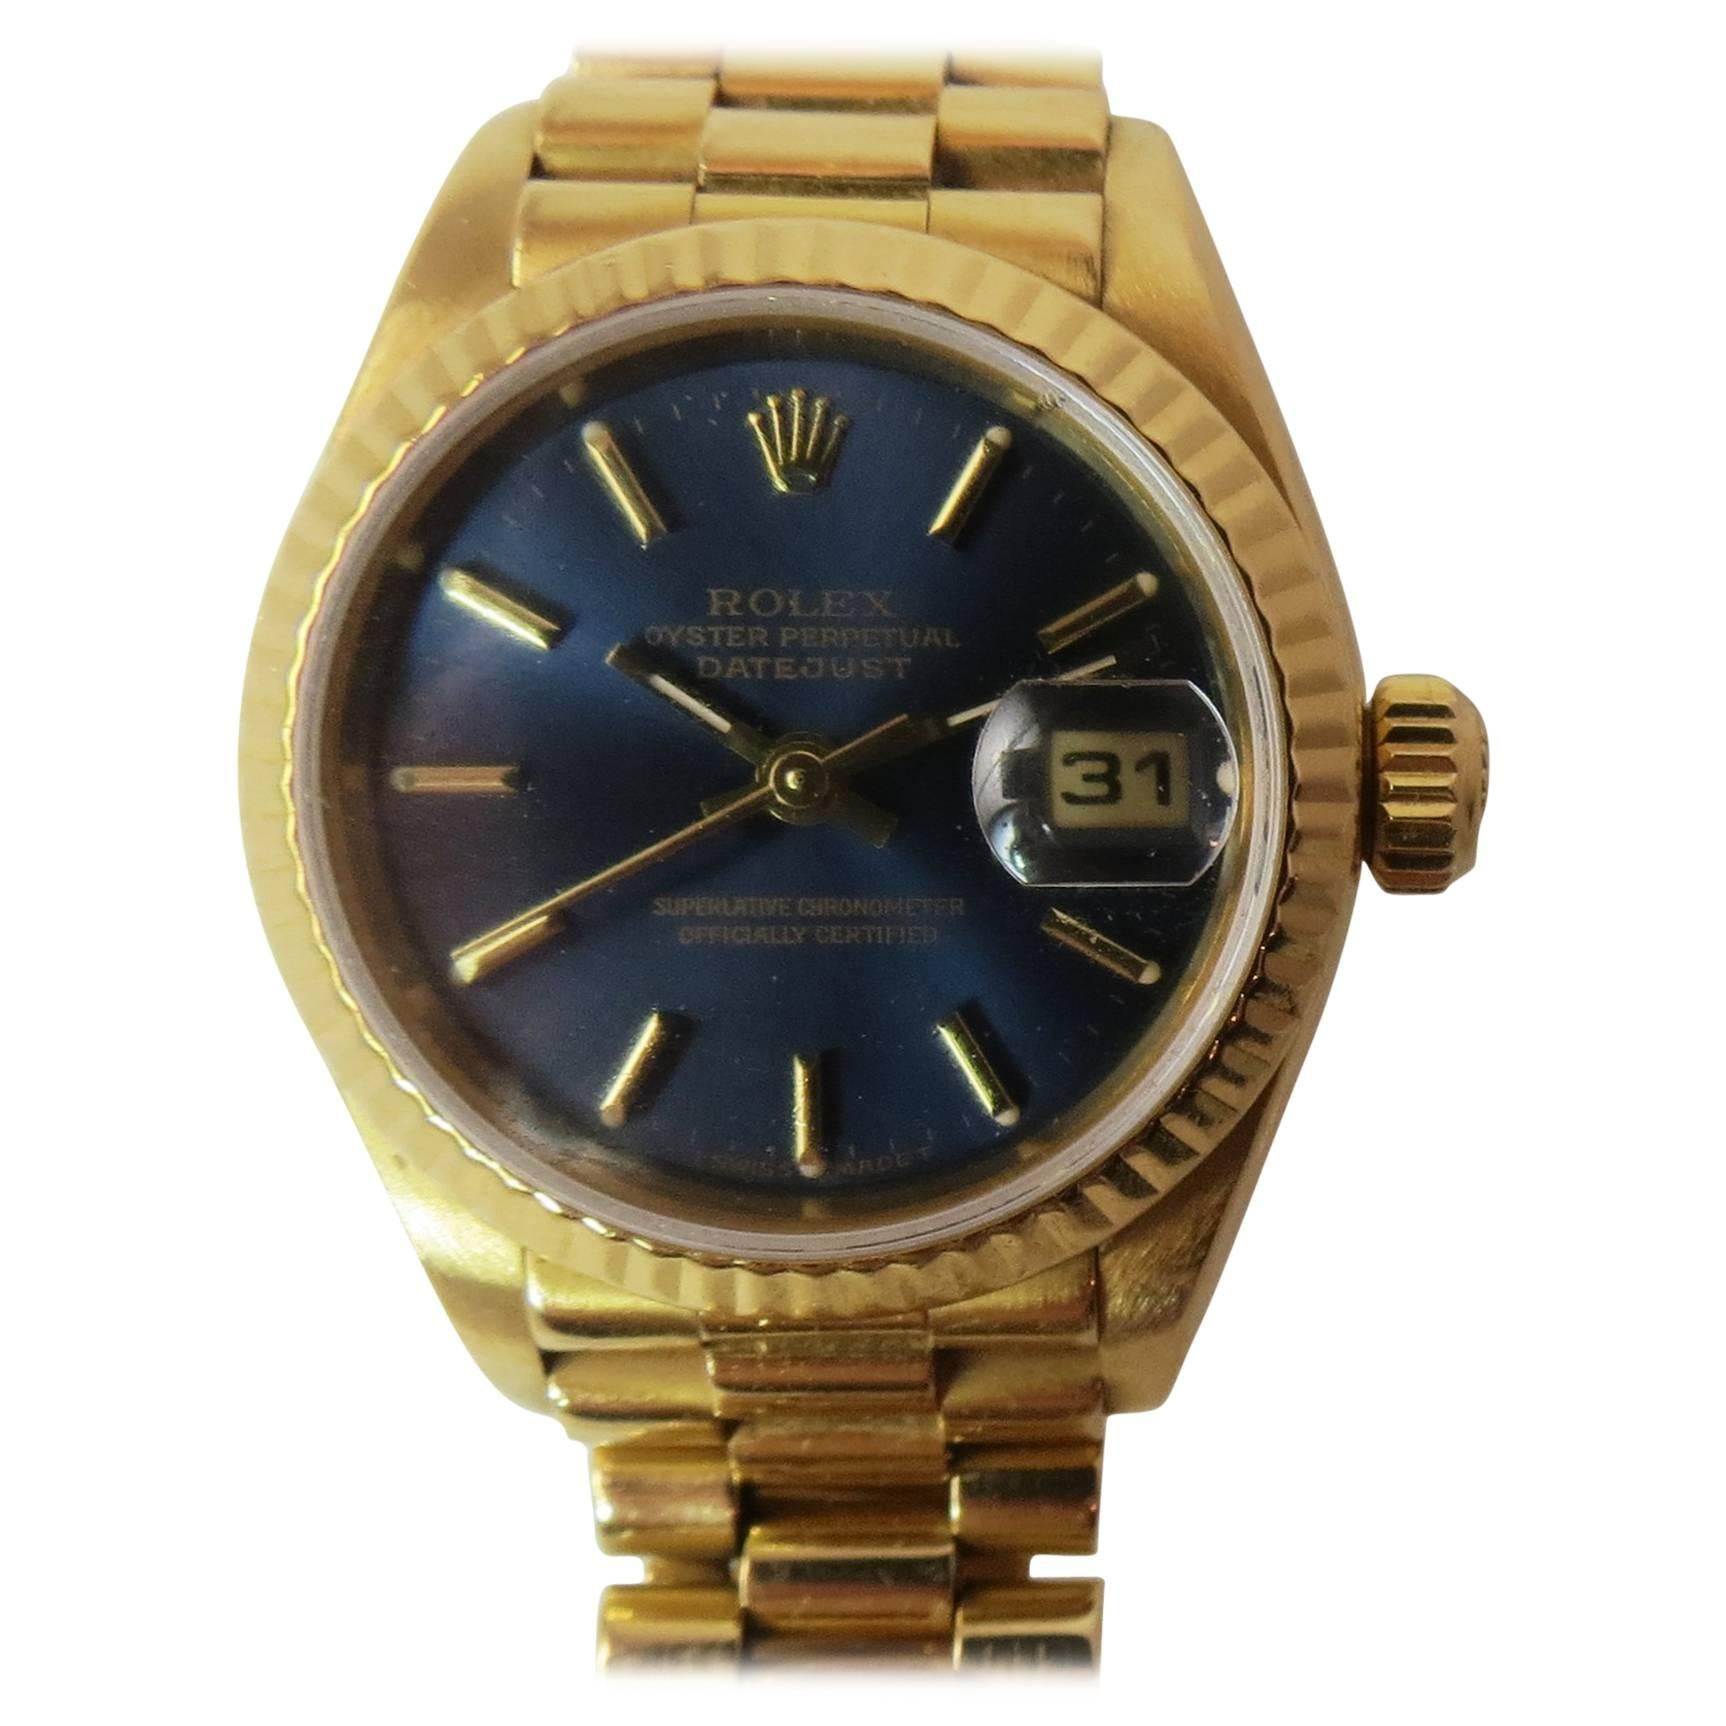 Rolex, Pre-owned 18K Yellow Gold Rolex Oyster Perpetual Datejust Bracelet Watch